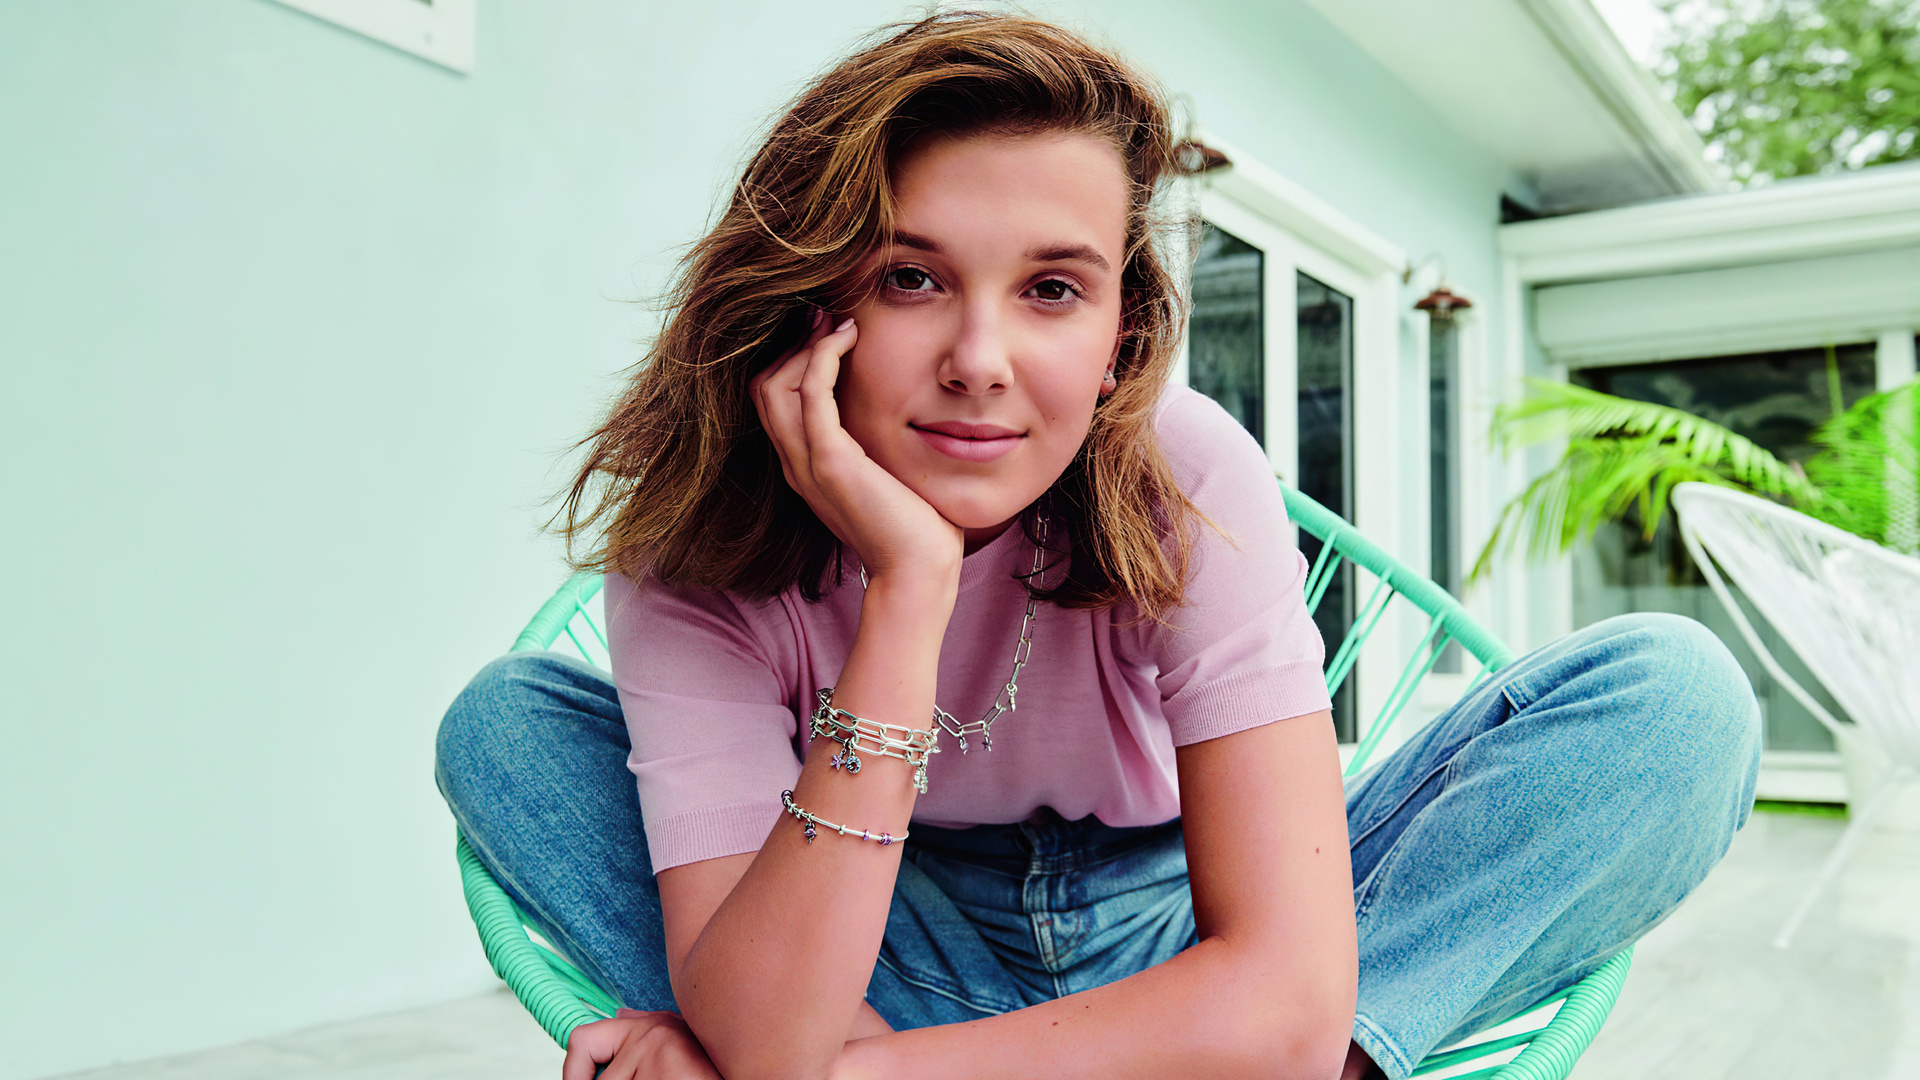 Millie Bobby Brown: Eleven, Primetime Emmy Award-nominated role. 1920x1080 Full HD Wallpaper.